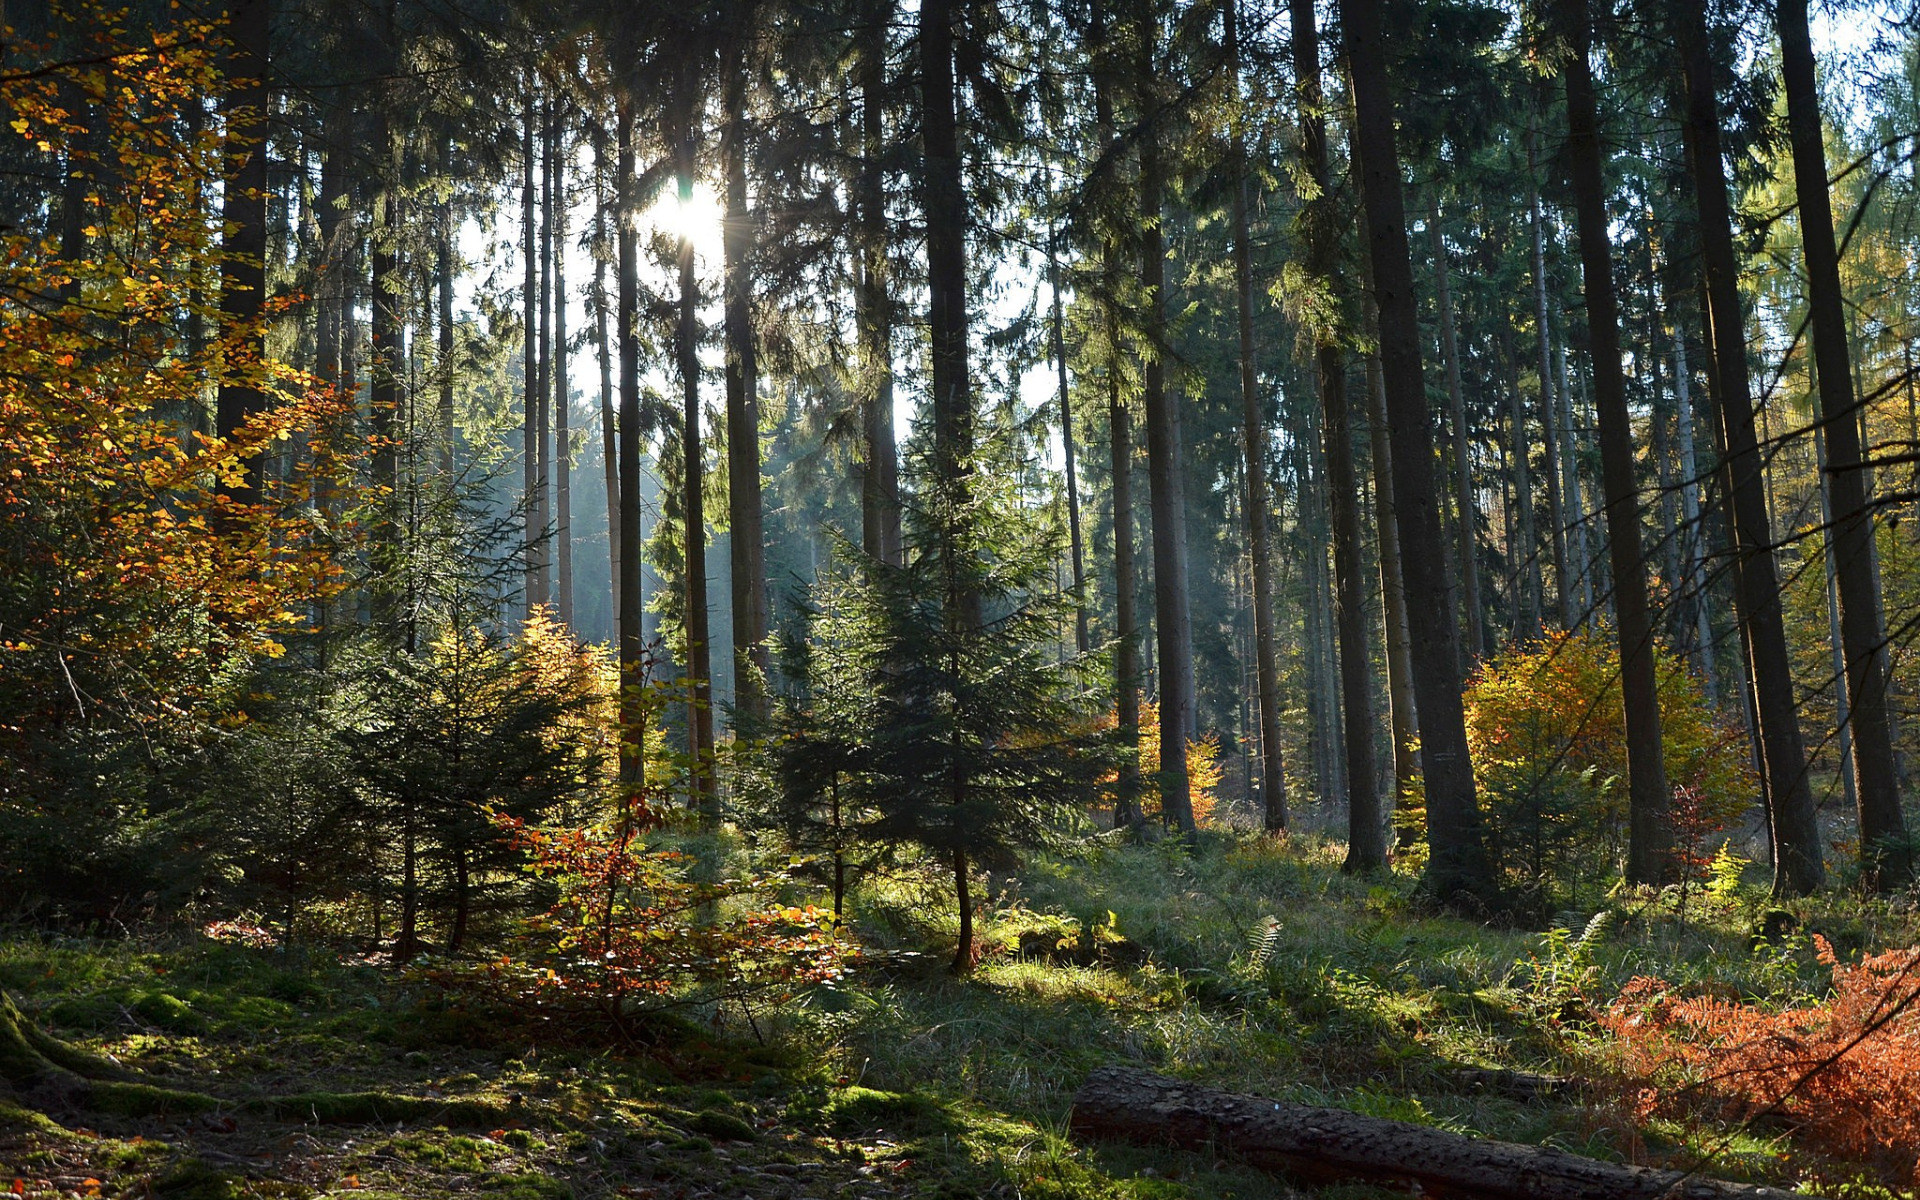 The beauty of the forest